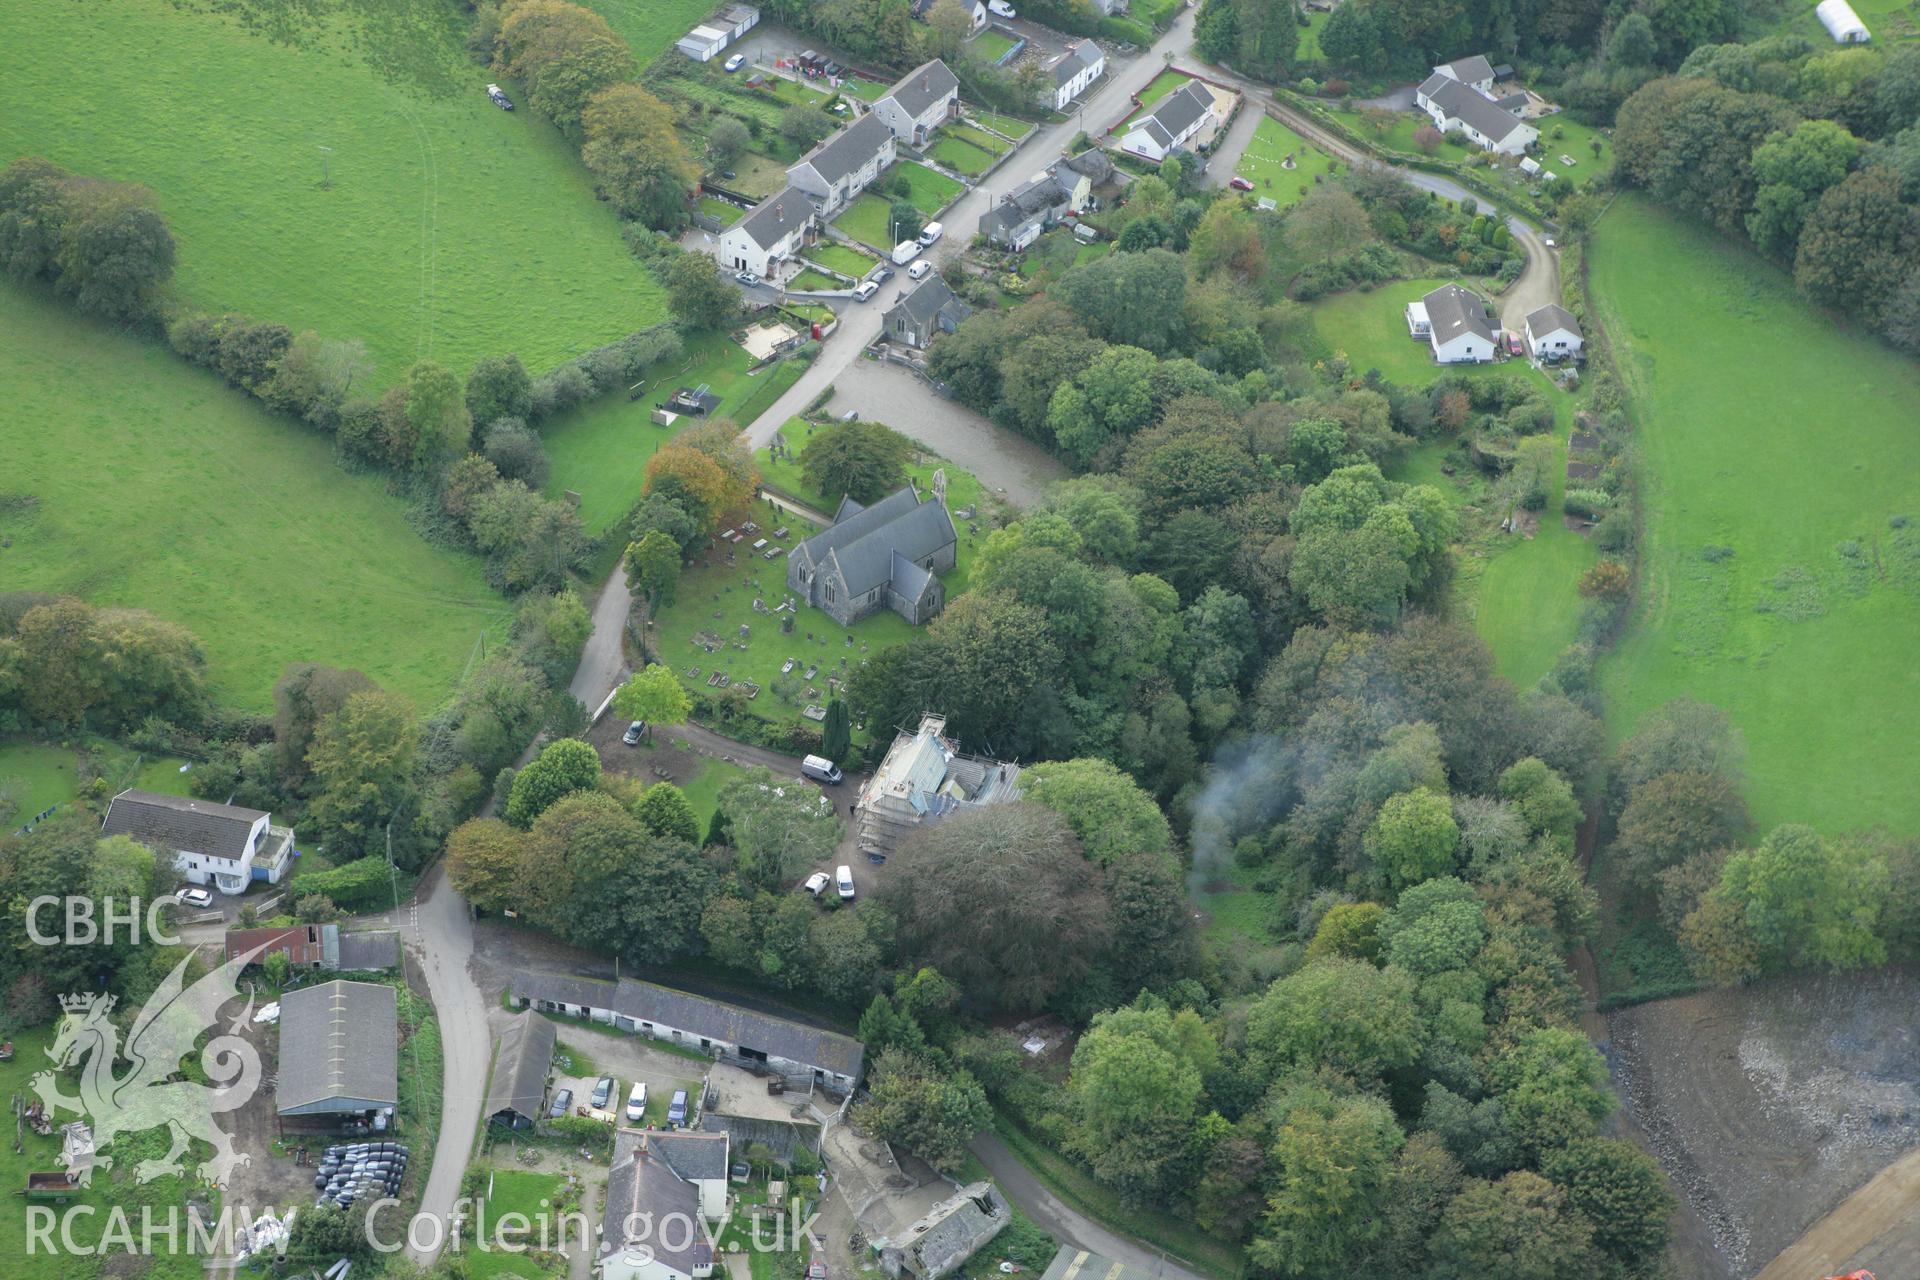 RCAHMW colour oblique aerial photograph of St Peter's Church and Lampeter Velfrey. Taken on 14 October 2009 by Toby Driver